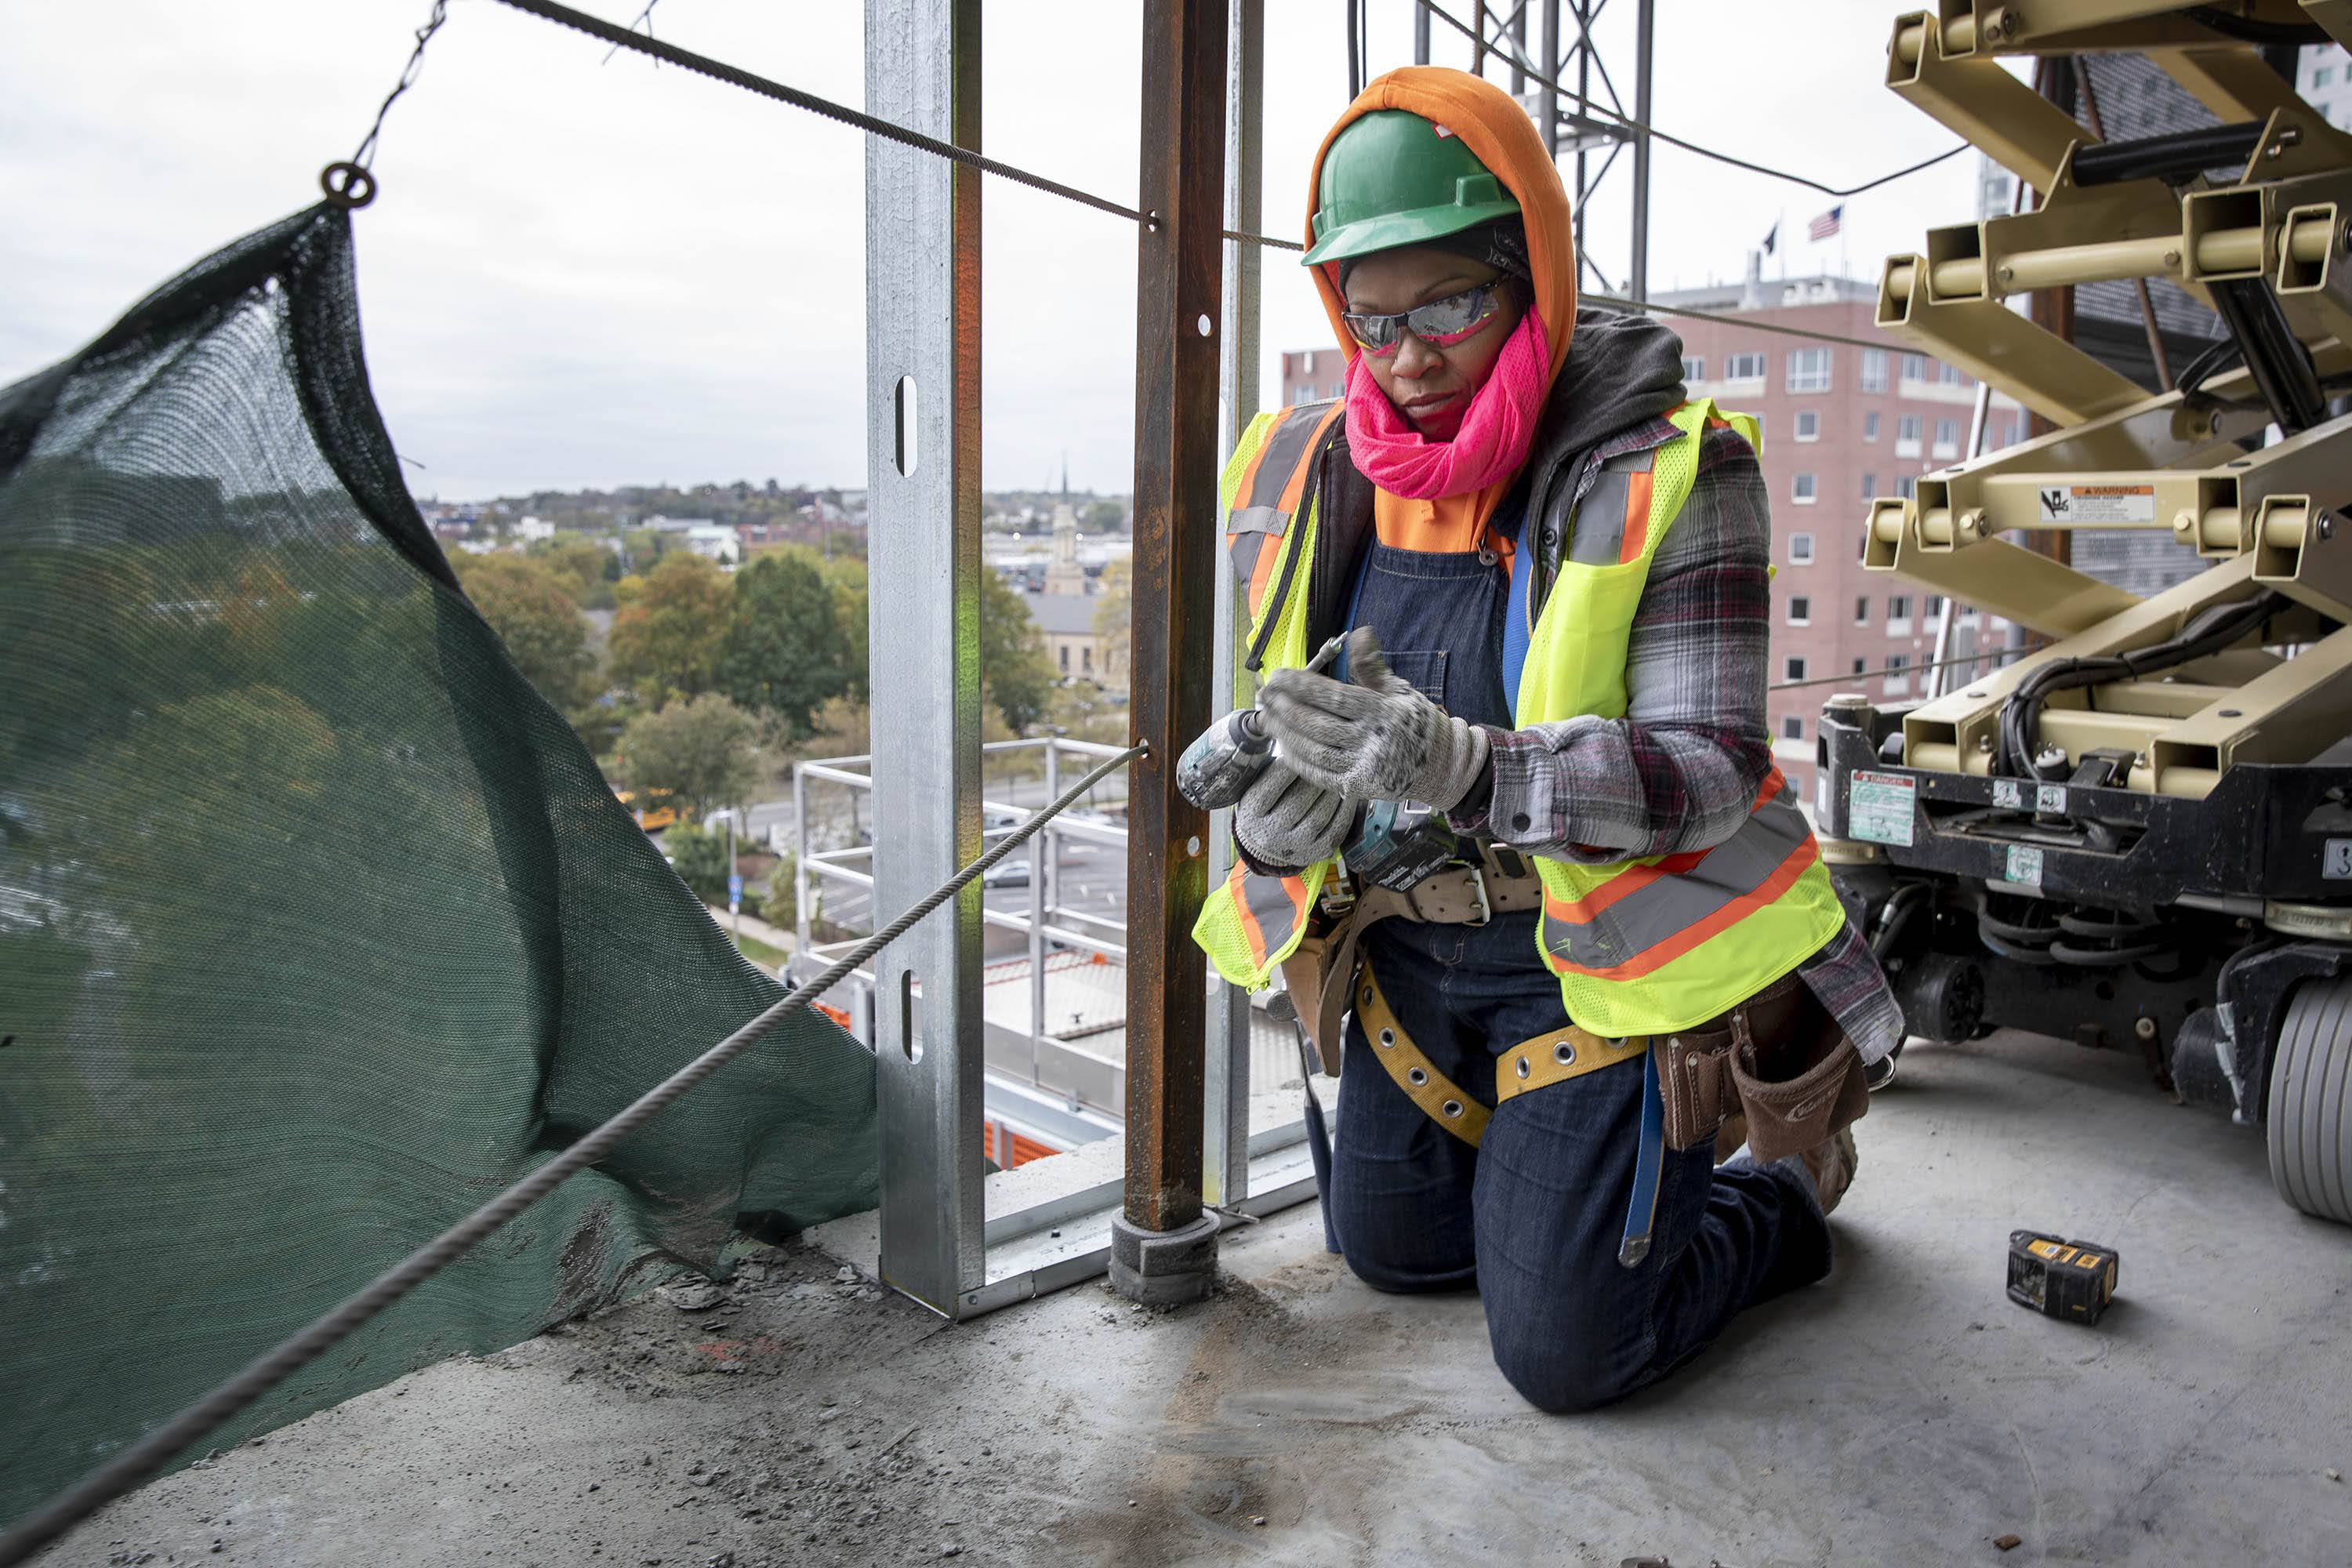 Eyoda Williams, a first year apprentice in carpentry, works on a construction site in Boston. (Robin Lubbock/WBUR)